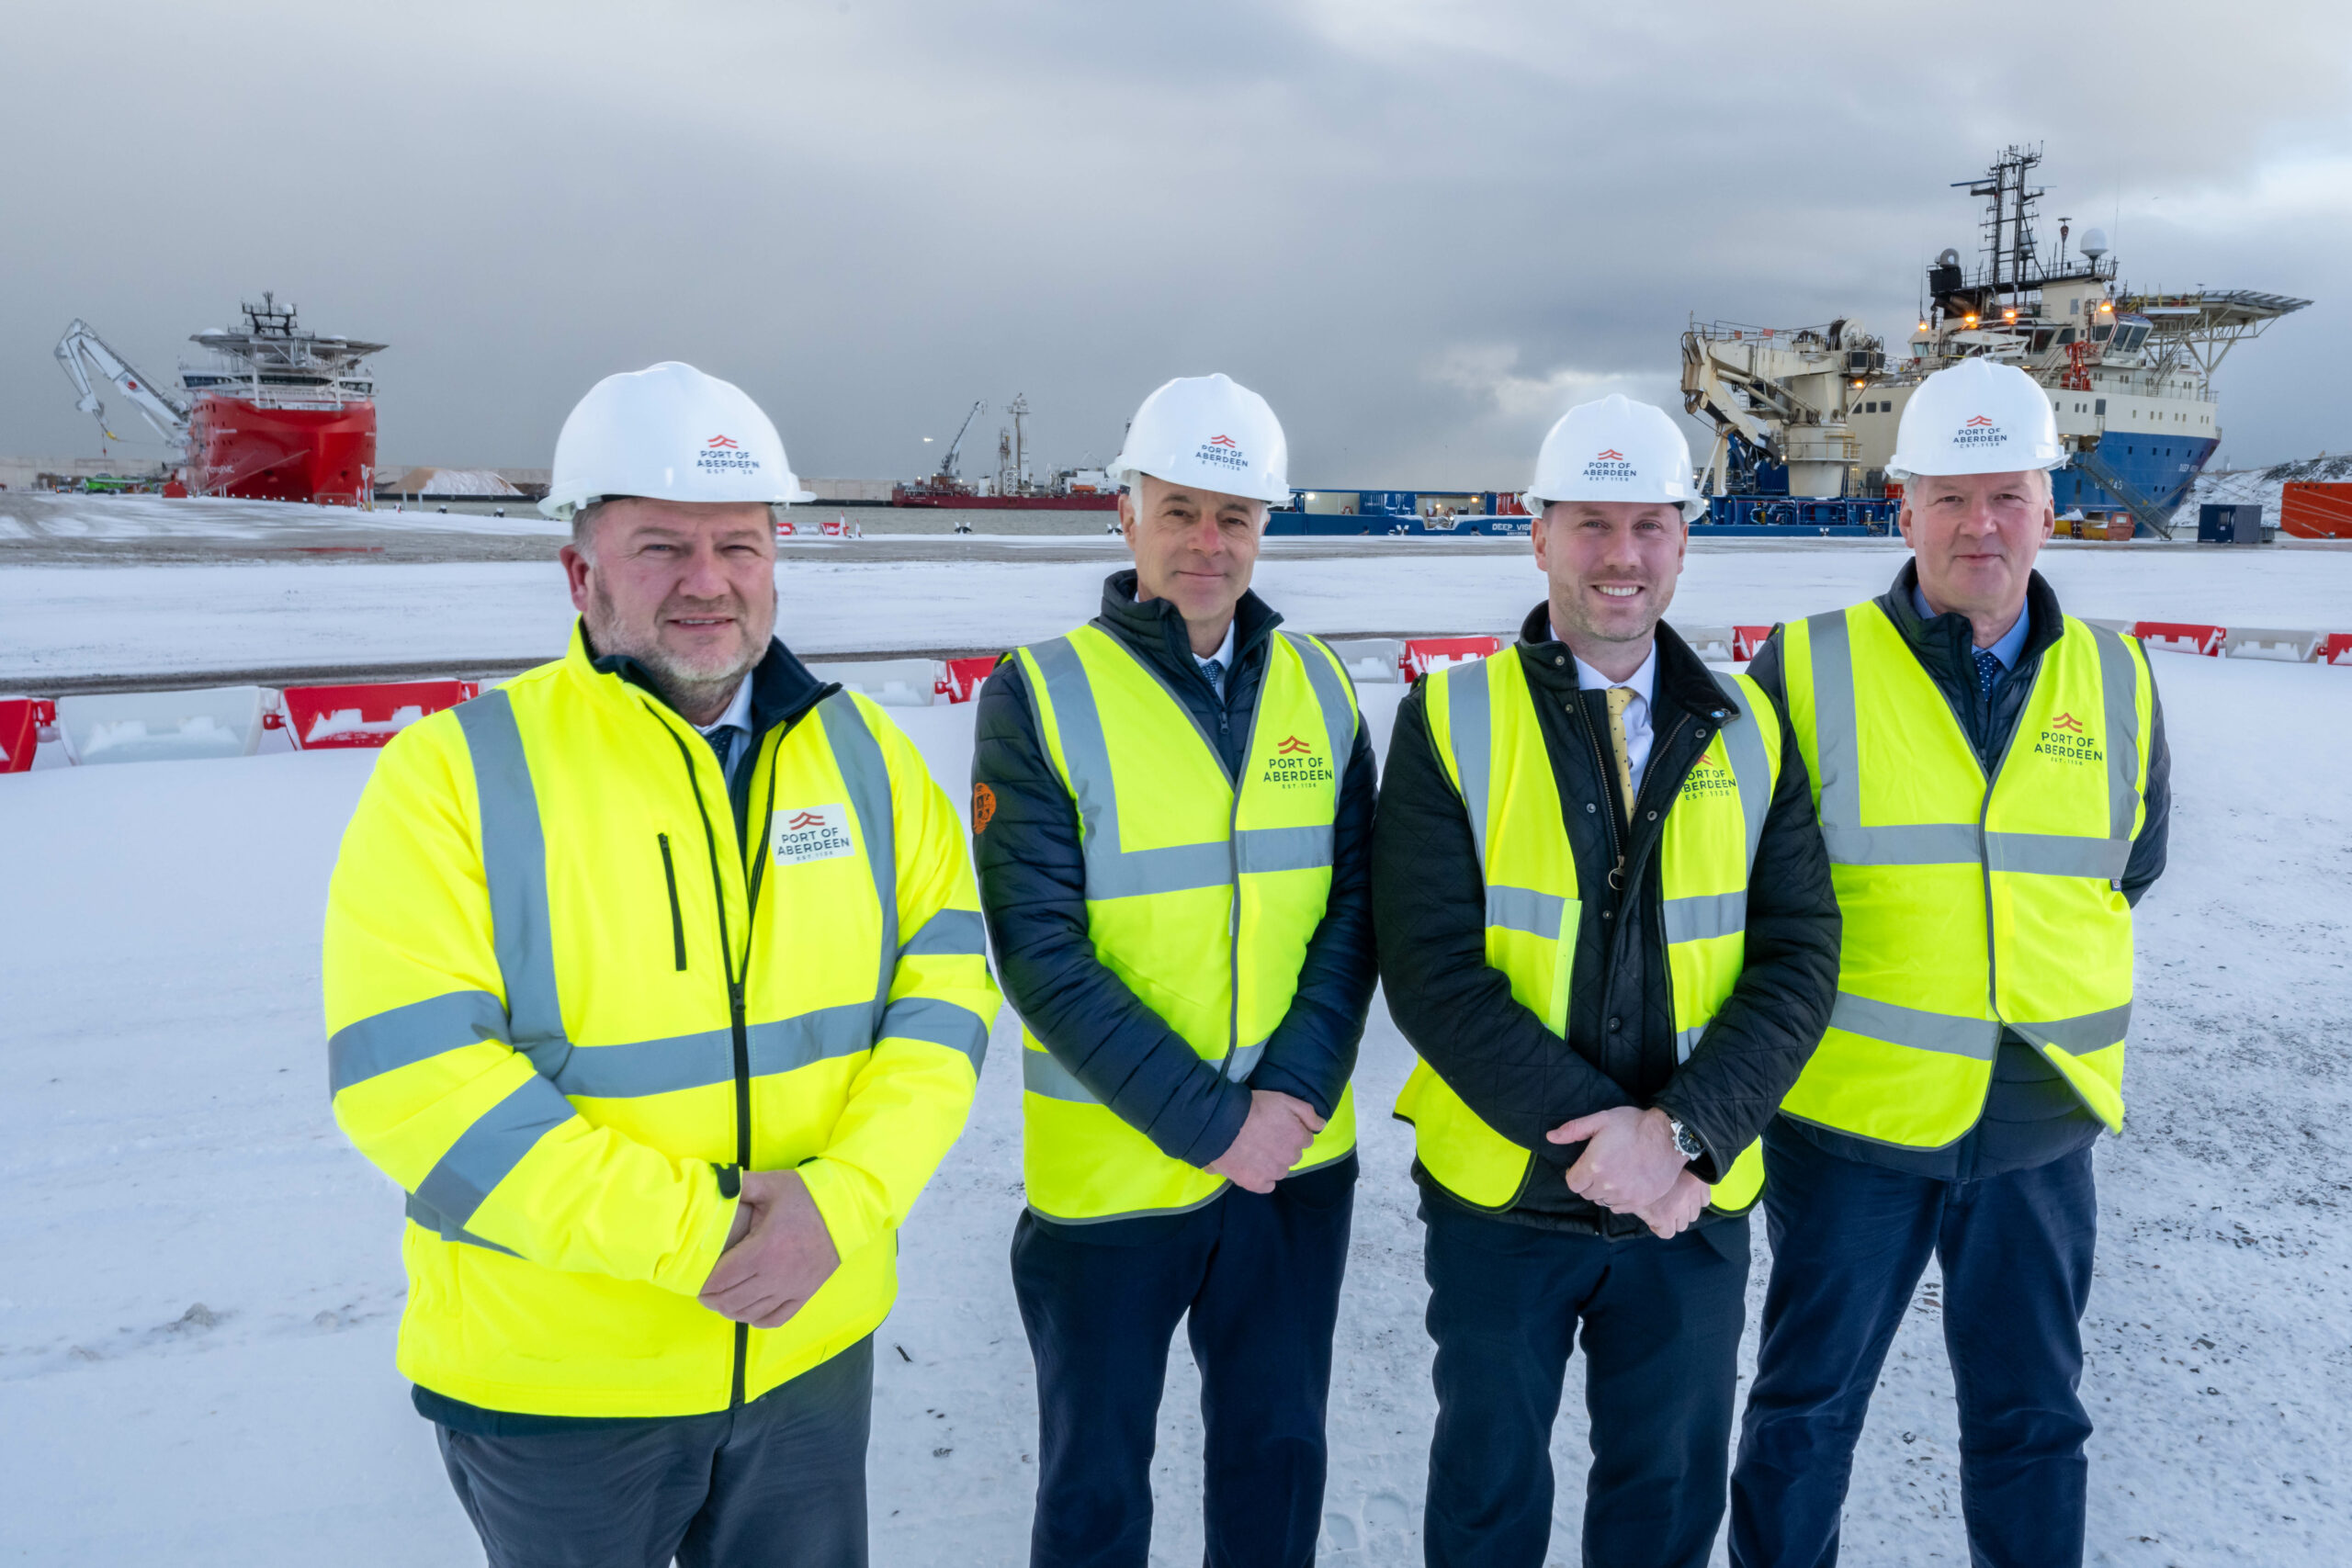 MEMBER NEWS: Energy Secretary sees transition in action at Port of Aberdeen